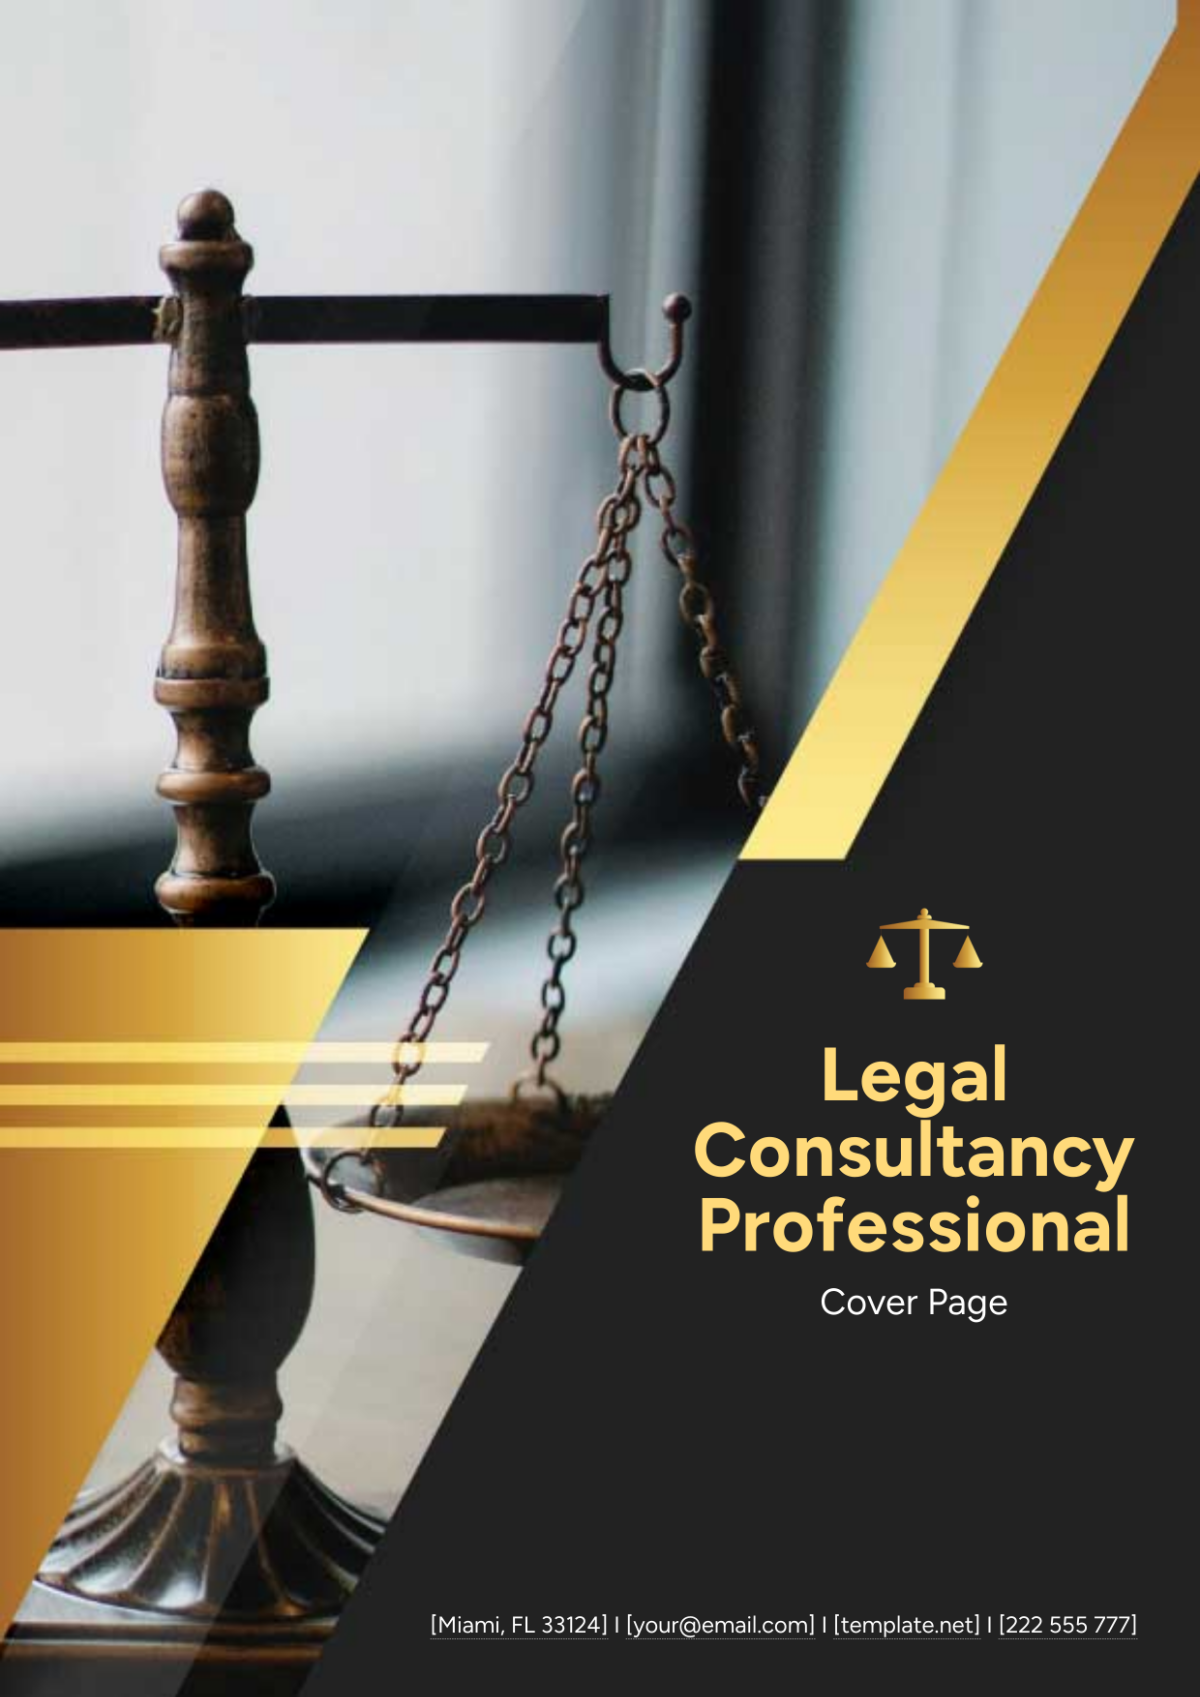 Legal Consultancy Professional Cover Page Template